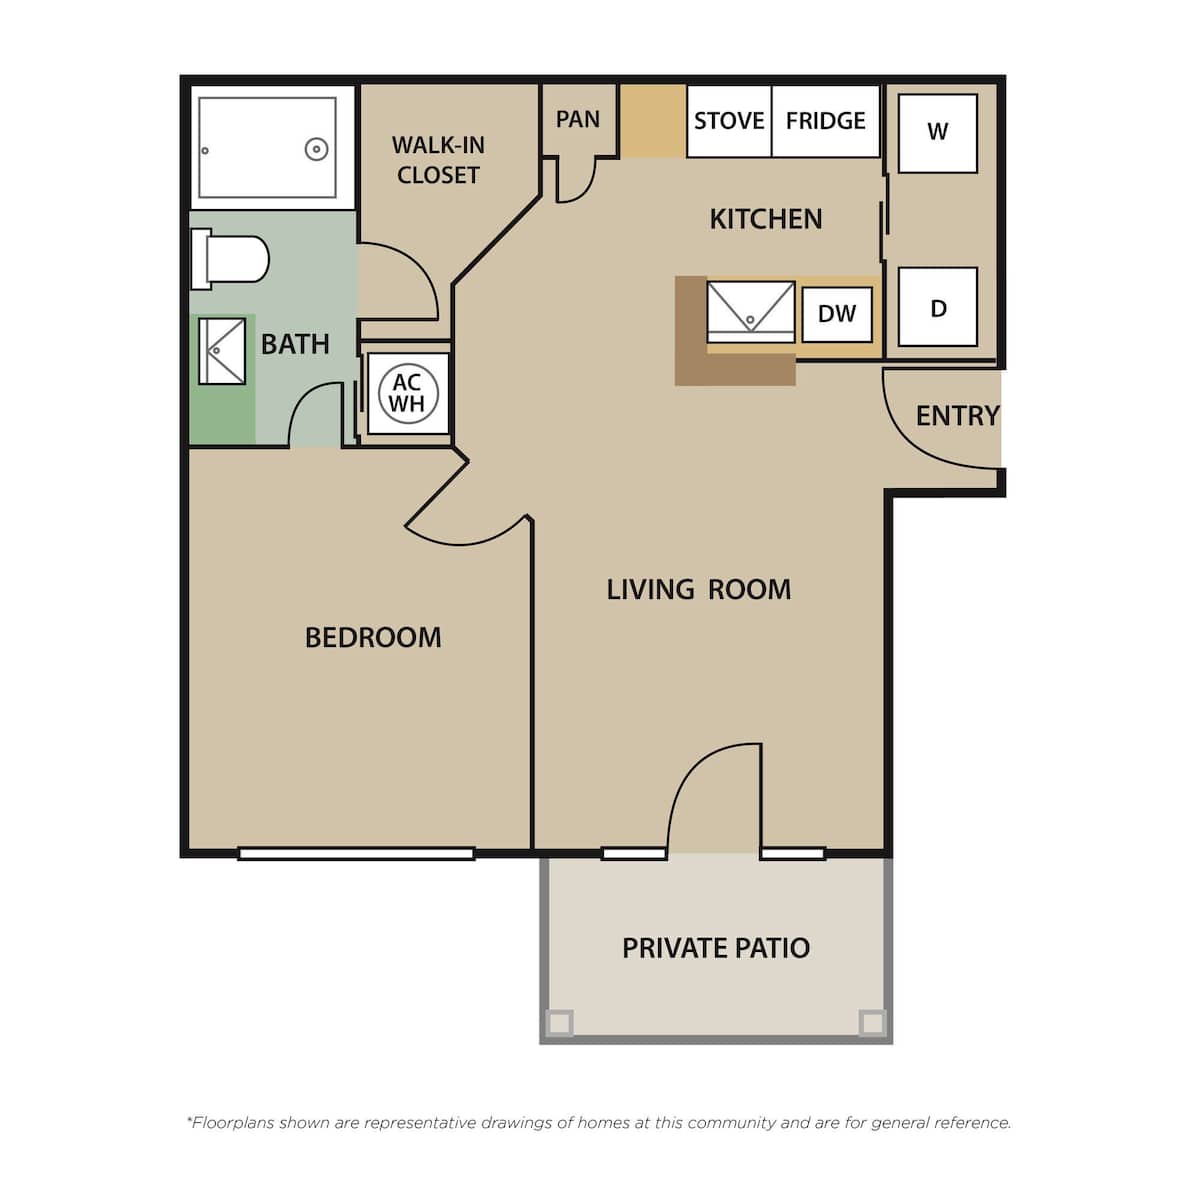 Floorplan diagram for SQUARE A2, showing 1 bedroom